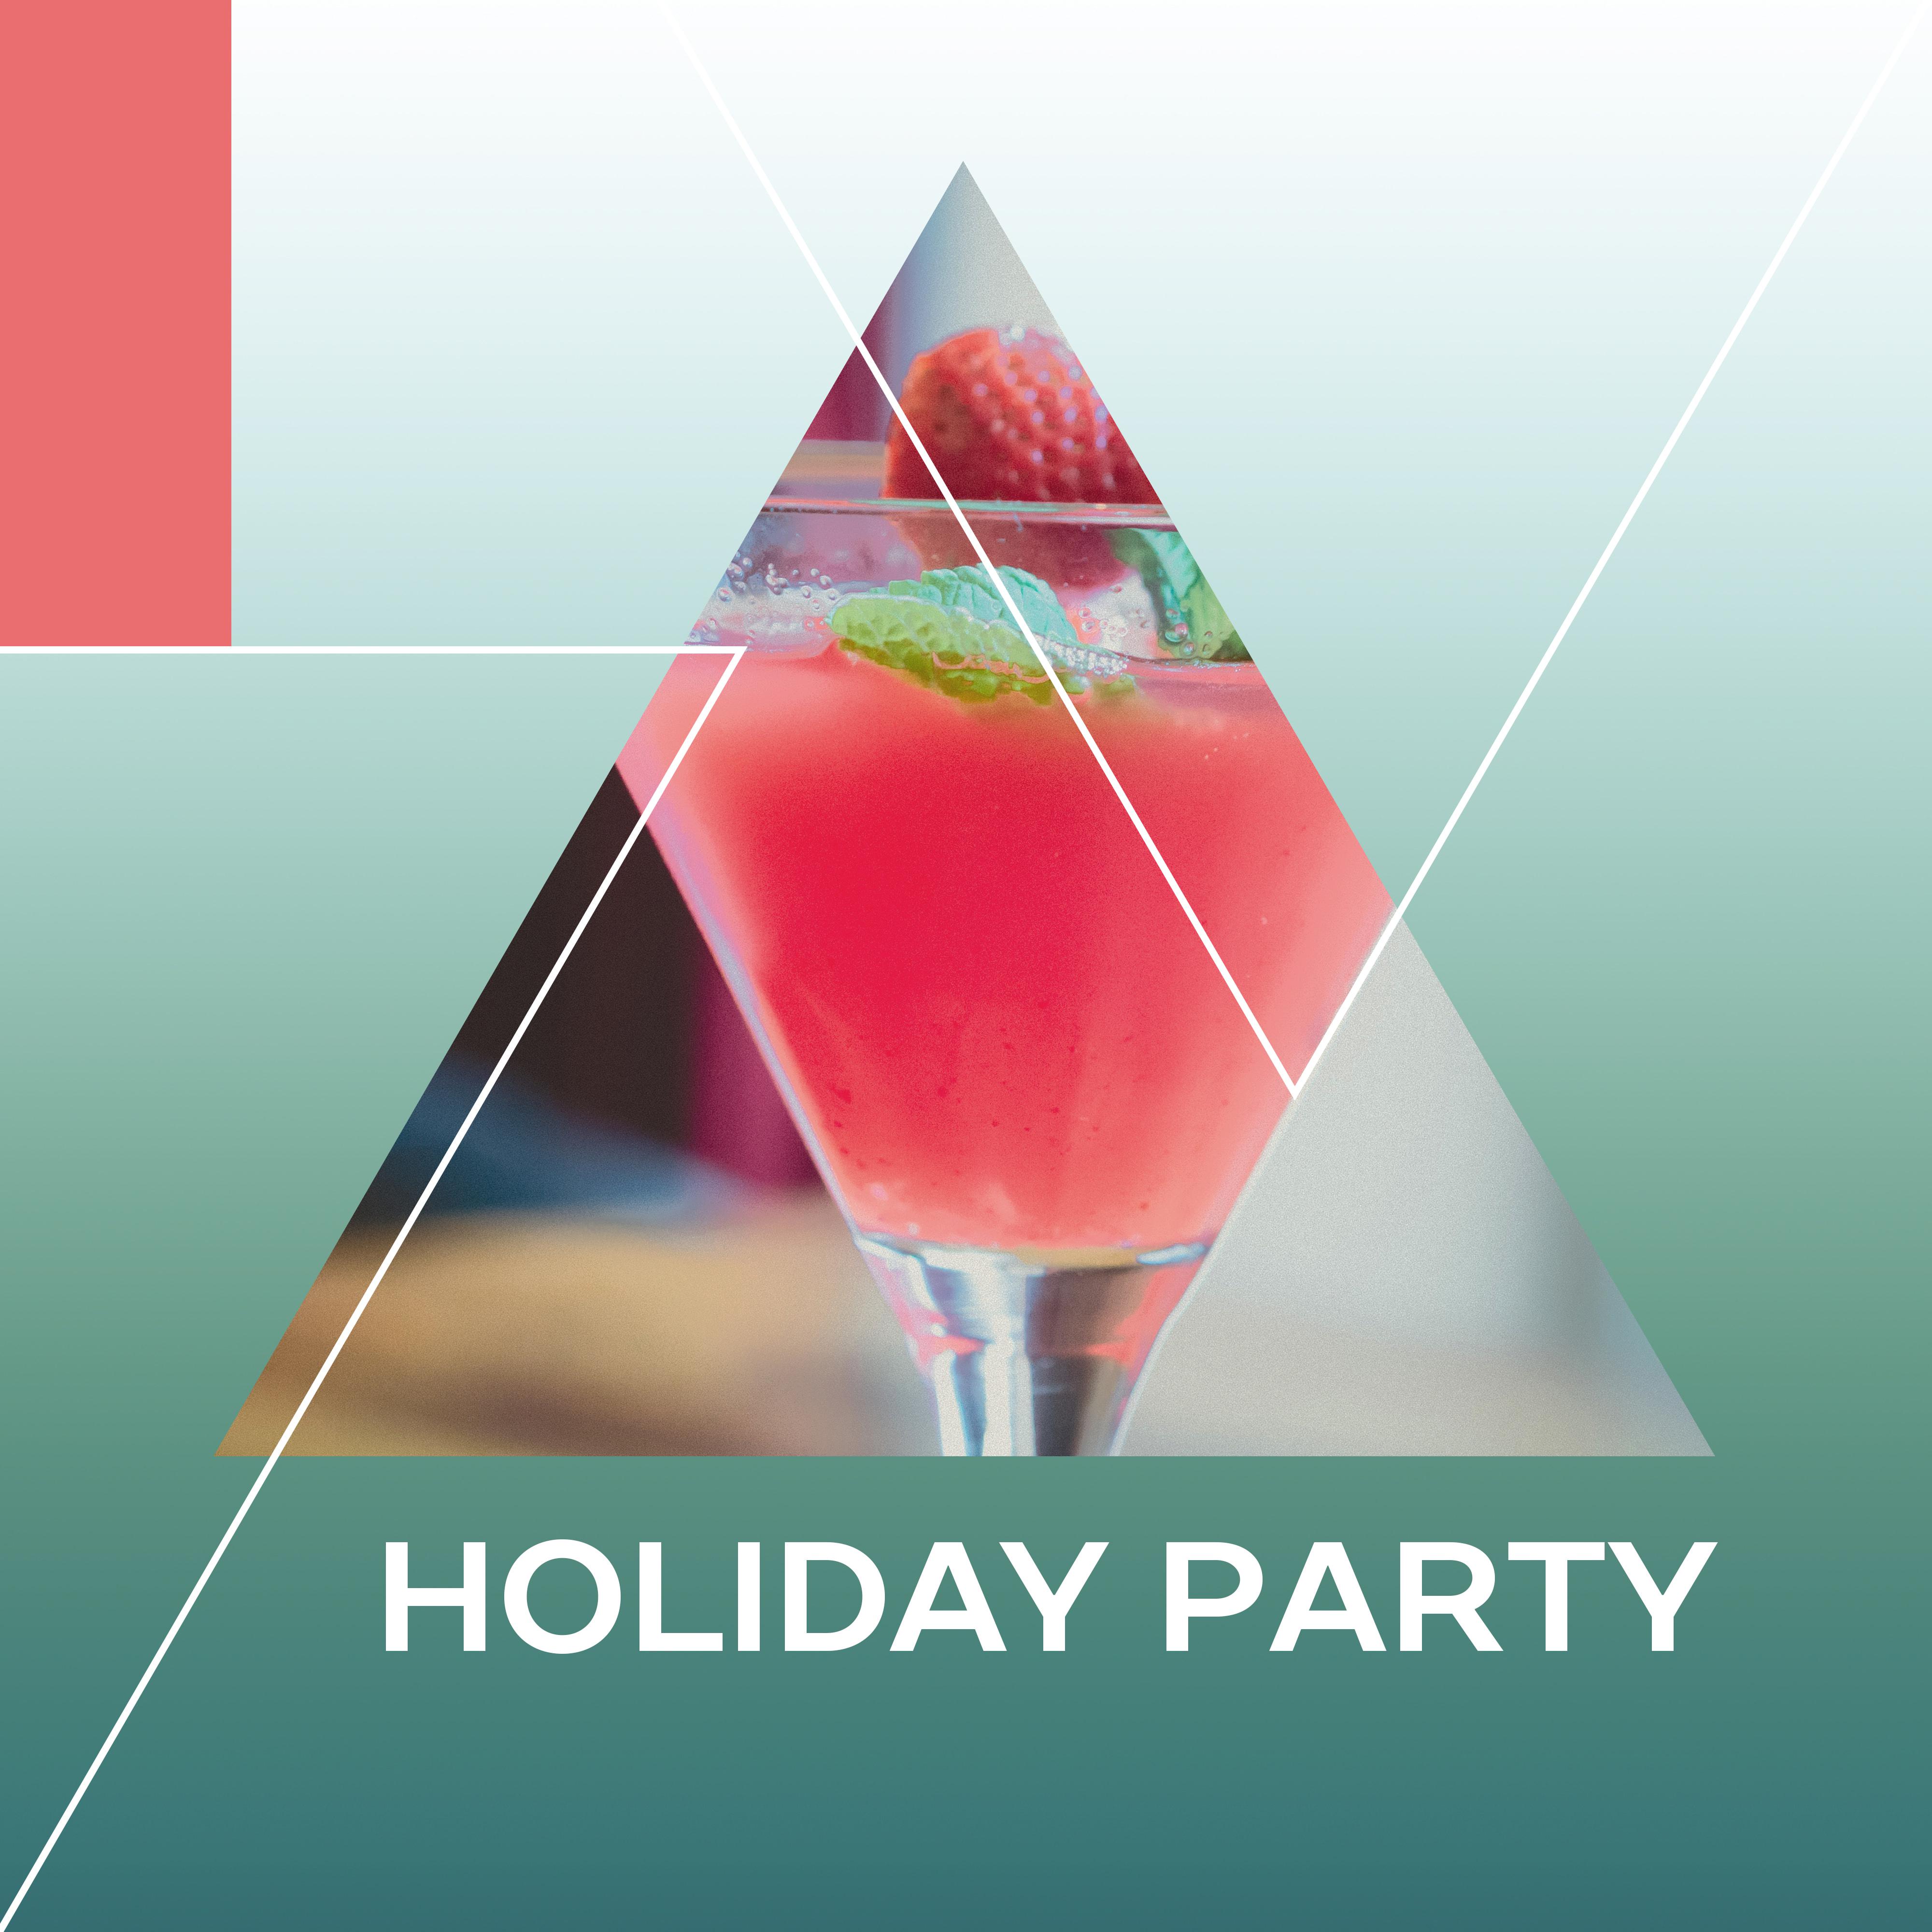 Holiday Party – Ibiza Lounge, Chillout Music, **** Beats, Beach Chill, Party Night, Summer